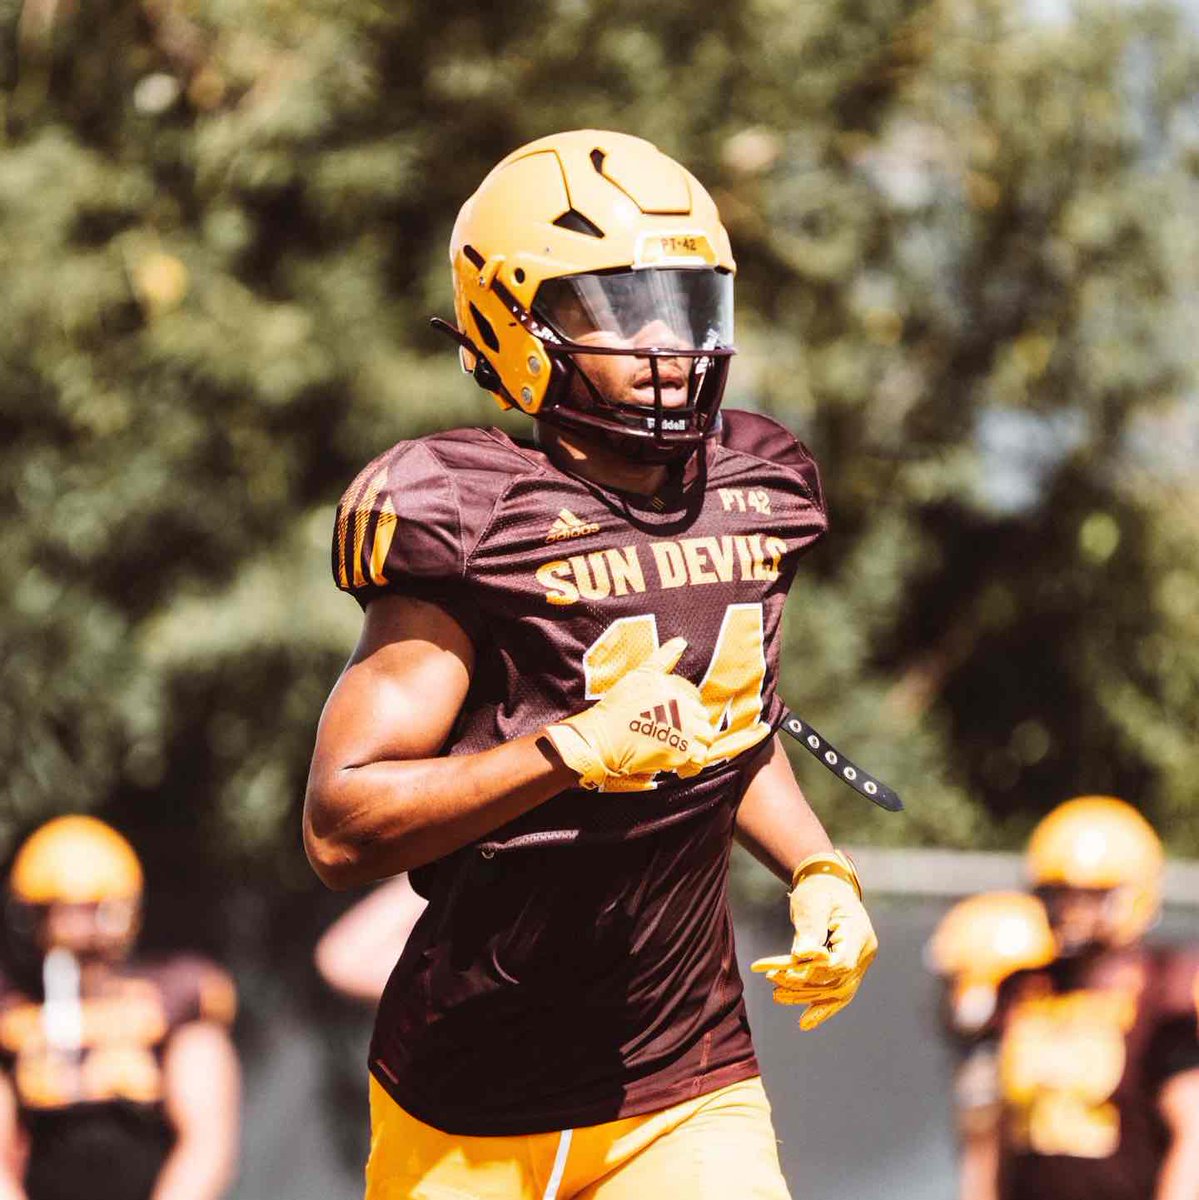 hudl.com/profile/792081… @mixtapezeek Arizona State Transfer 2nd Team All Conference True 4.3 speed 6’1 190 Multiple KR Touchdowns @KC_MTXE 27.1 yds/rec Explosive Playmaker with the ball in his hands. Deep Threat, but can still run the whole tree! @JUCOFFrenzy